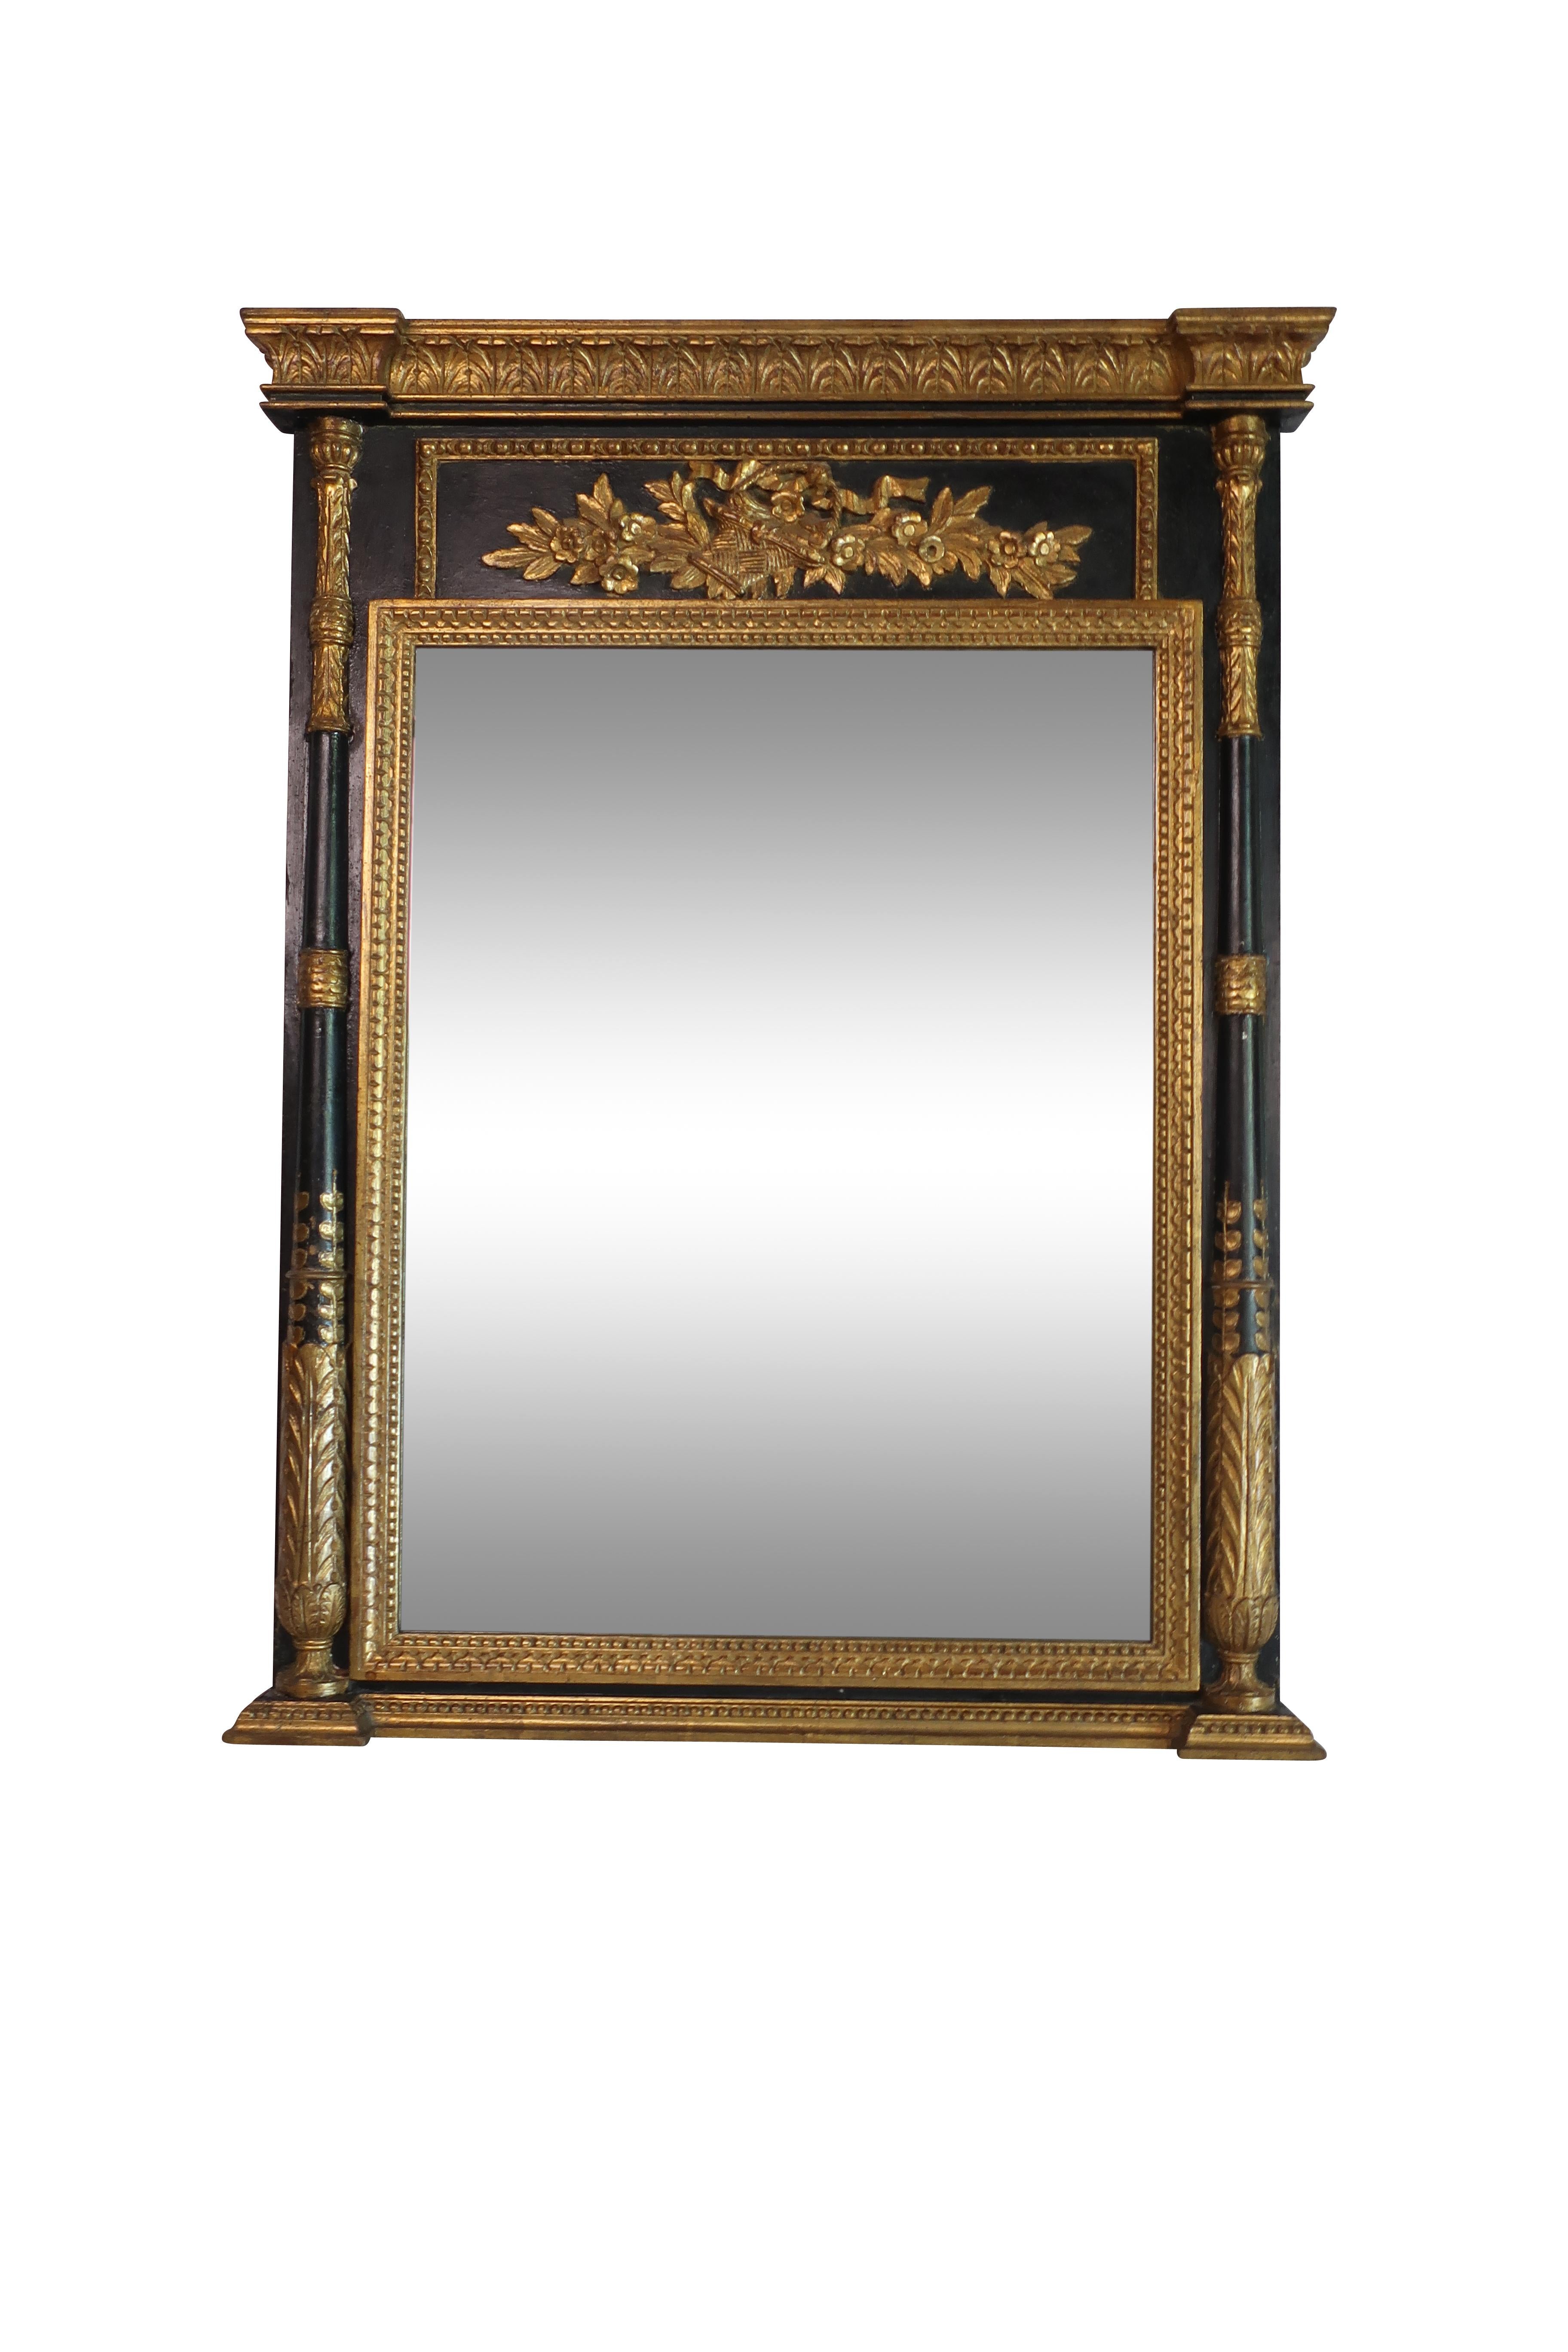 Hand-Carved Neoclassical Parcel-Gilt Mirror with Finely Carved Giltwood Columns